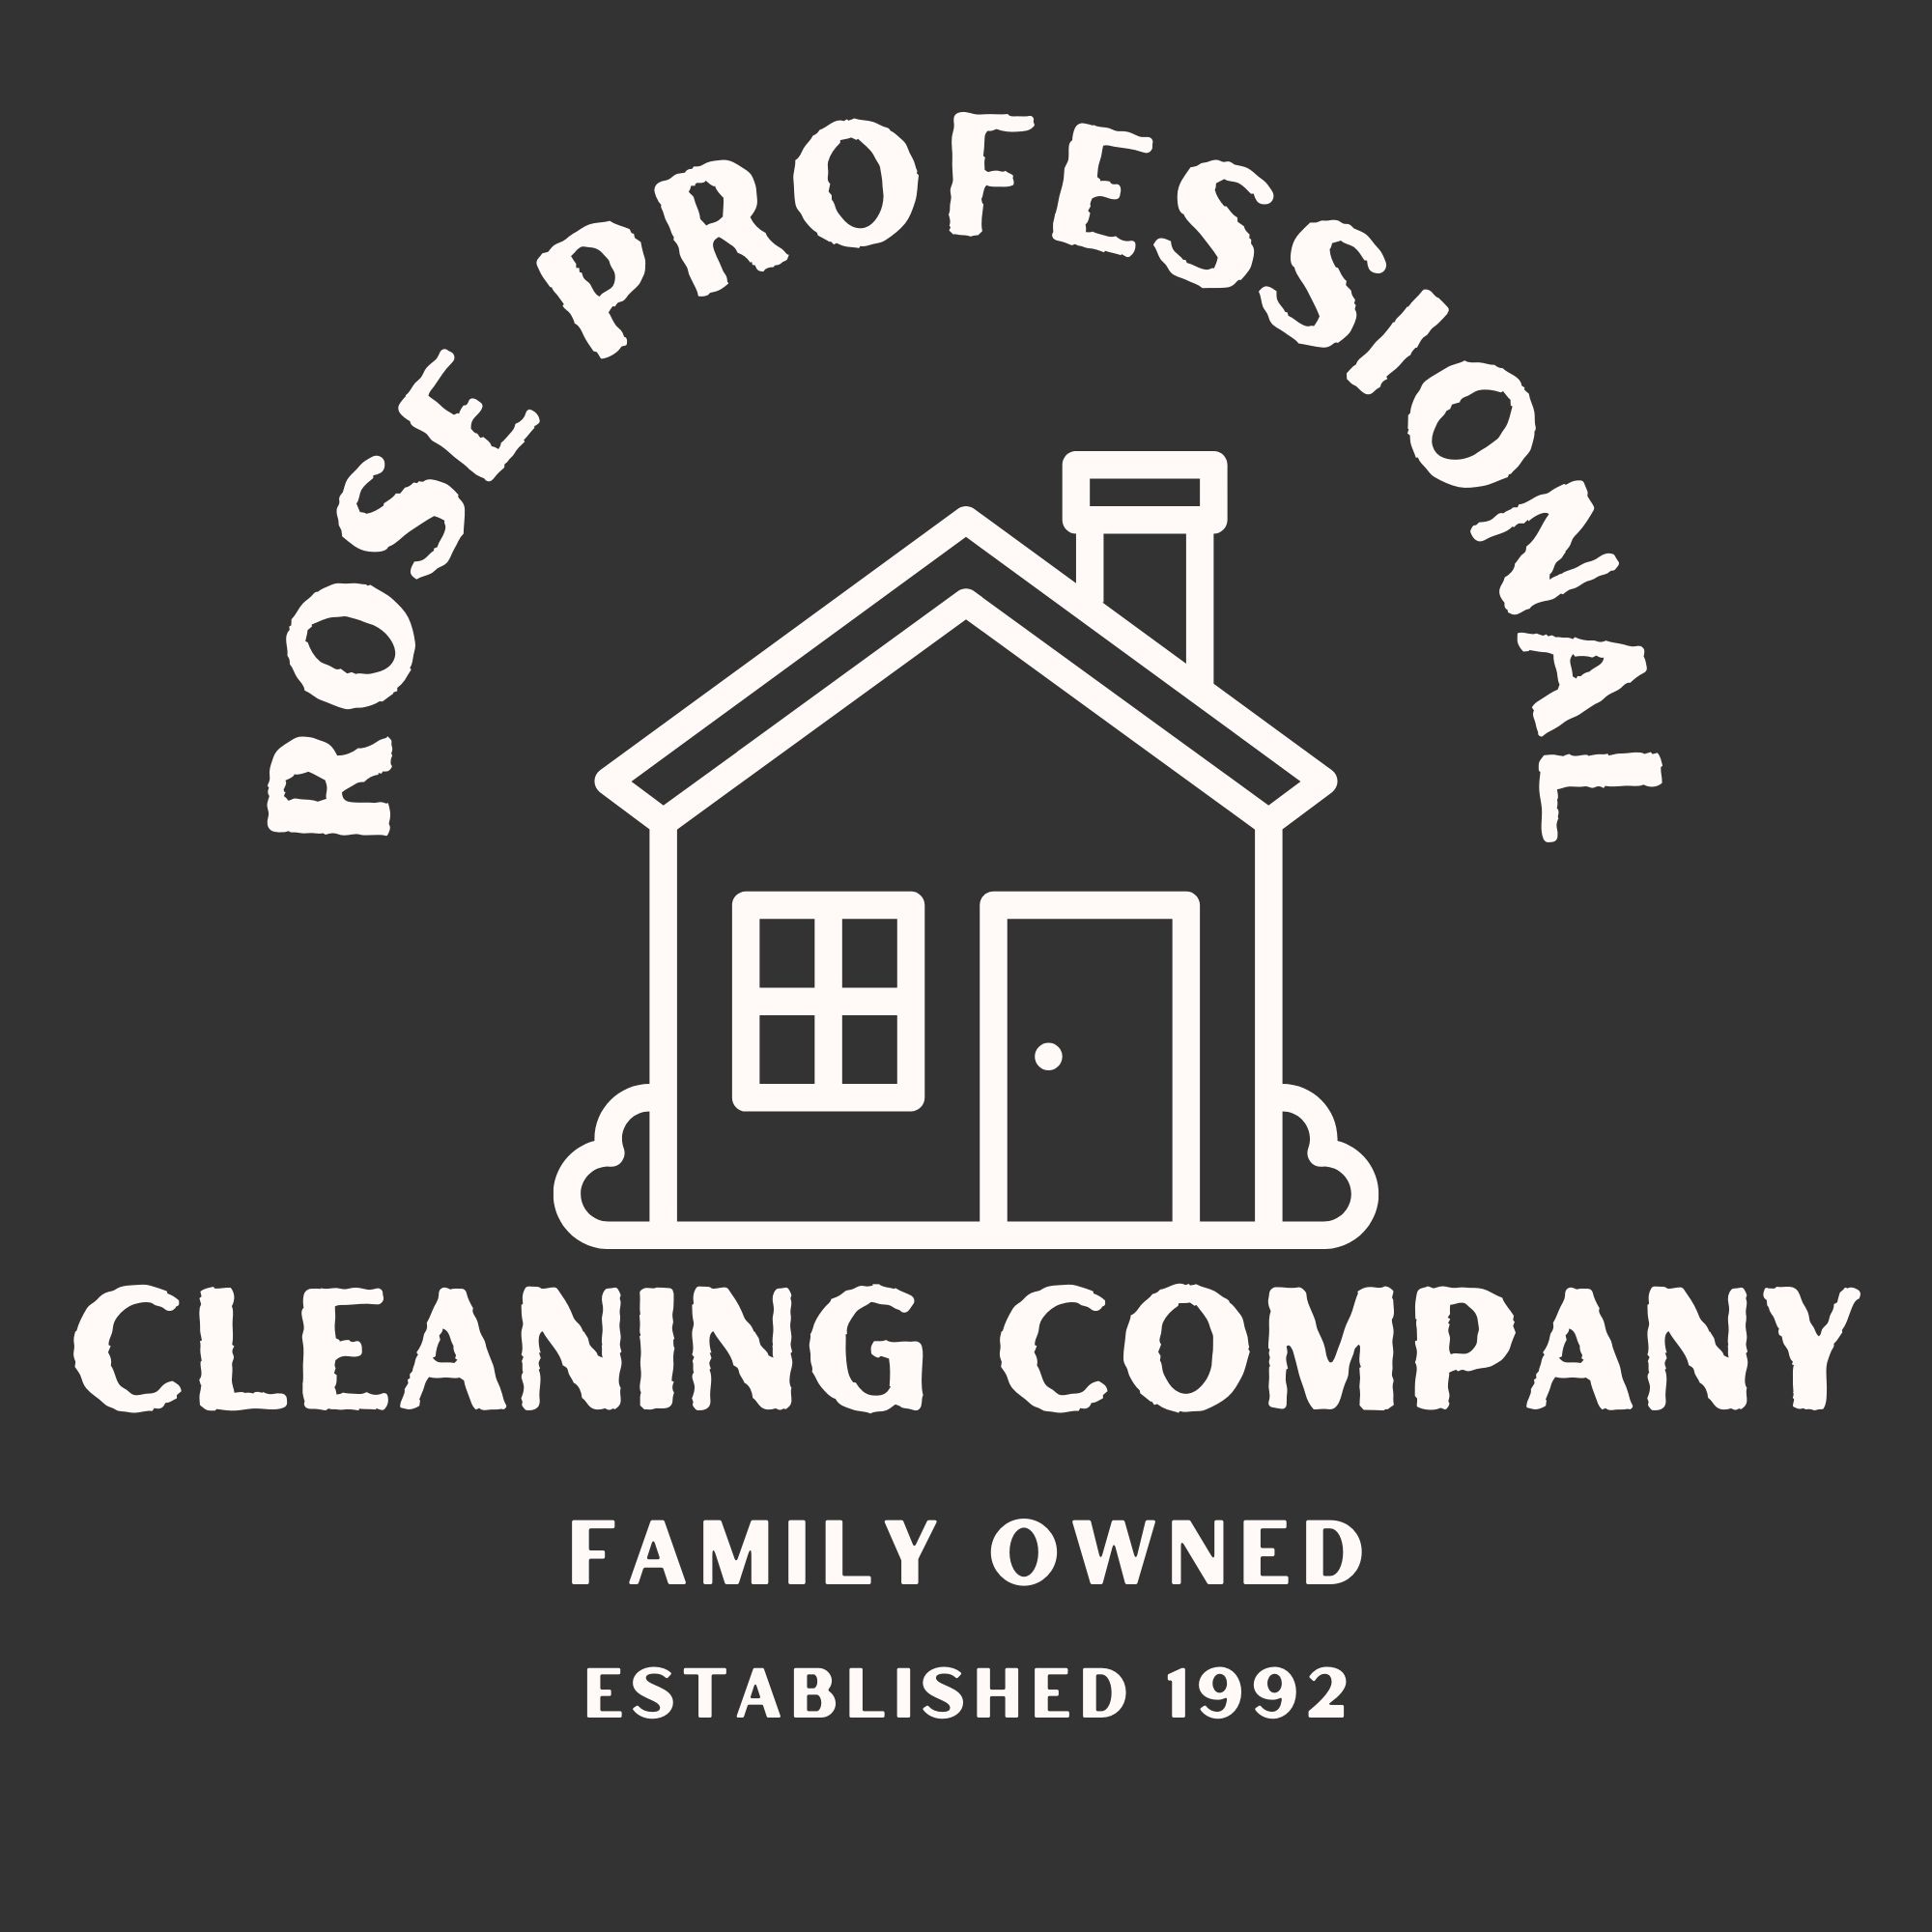 Rose Professional Cleaning